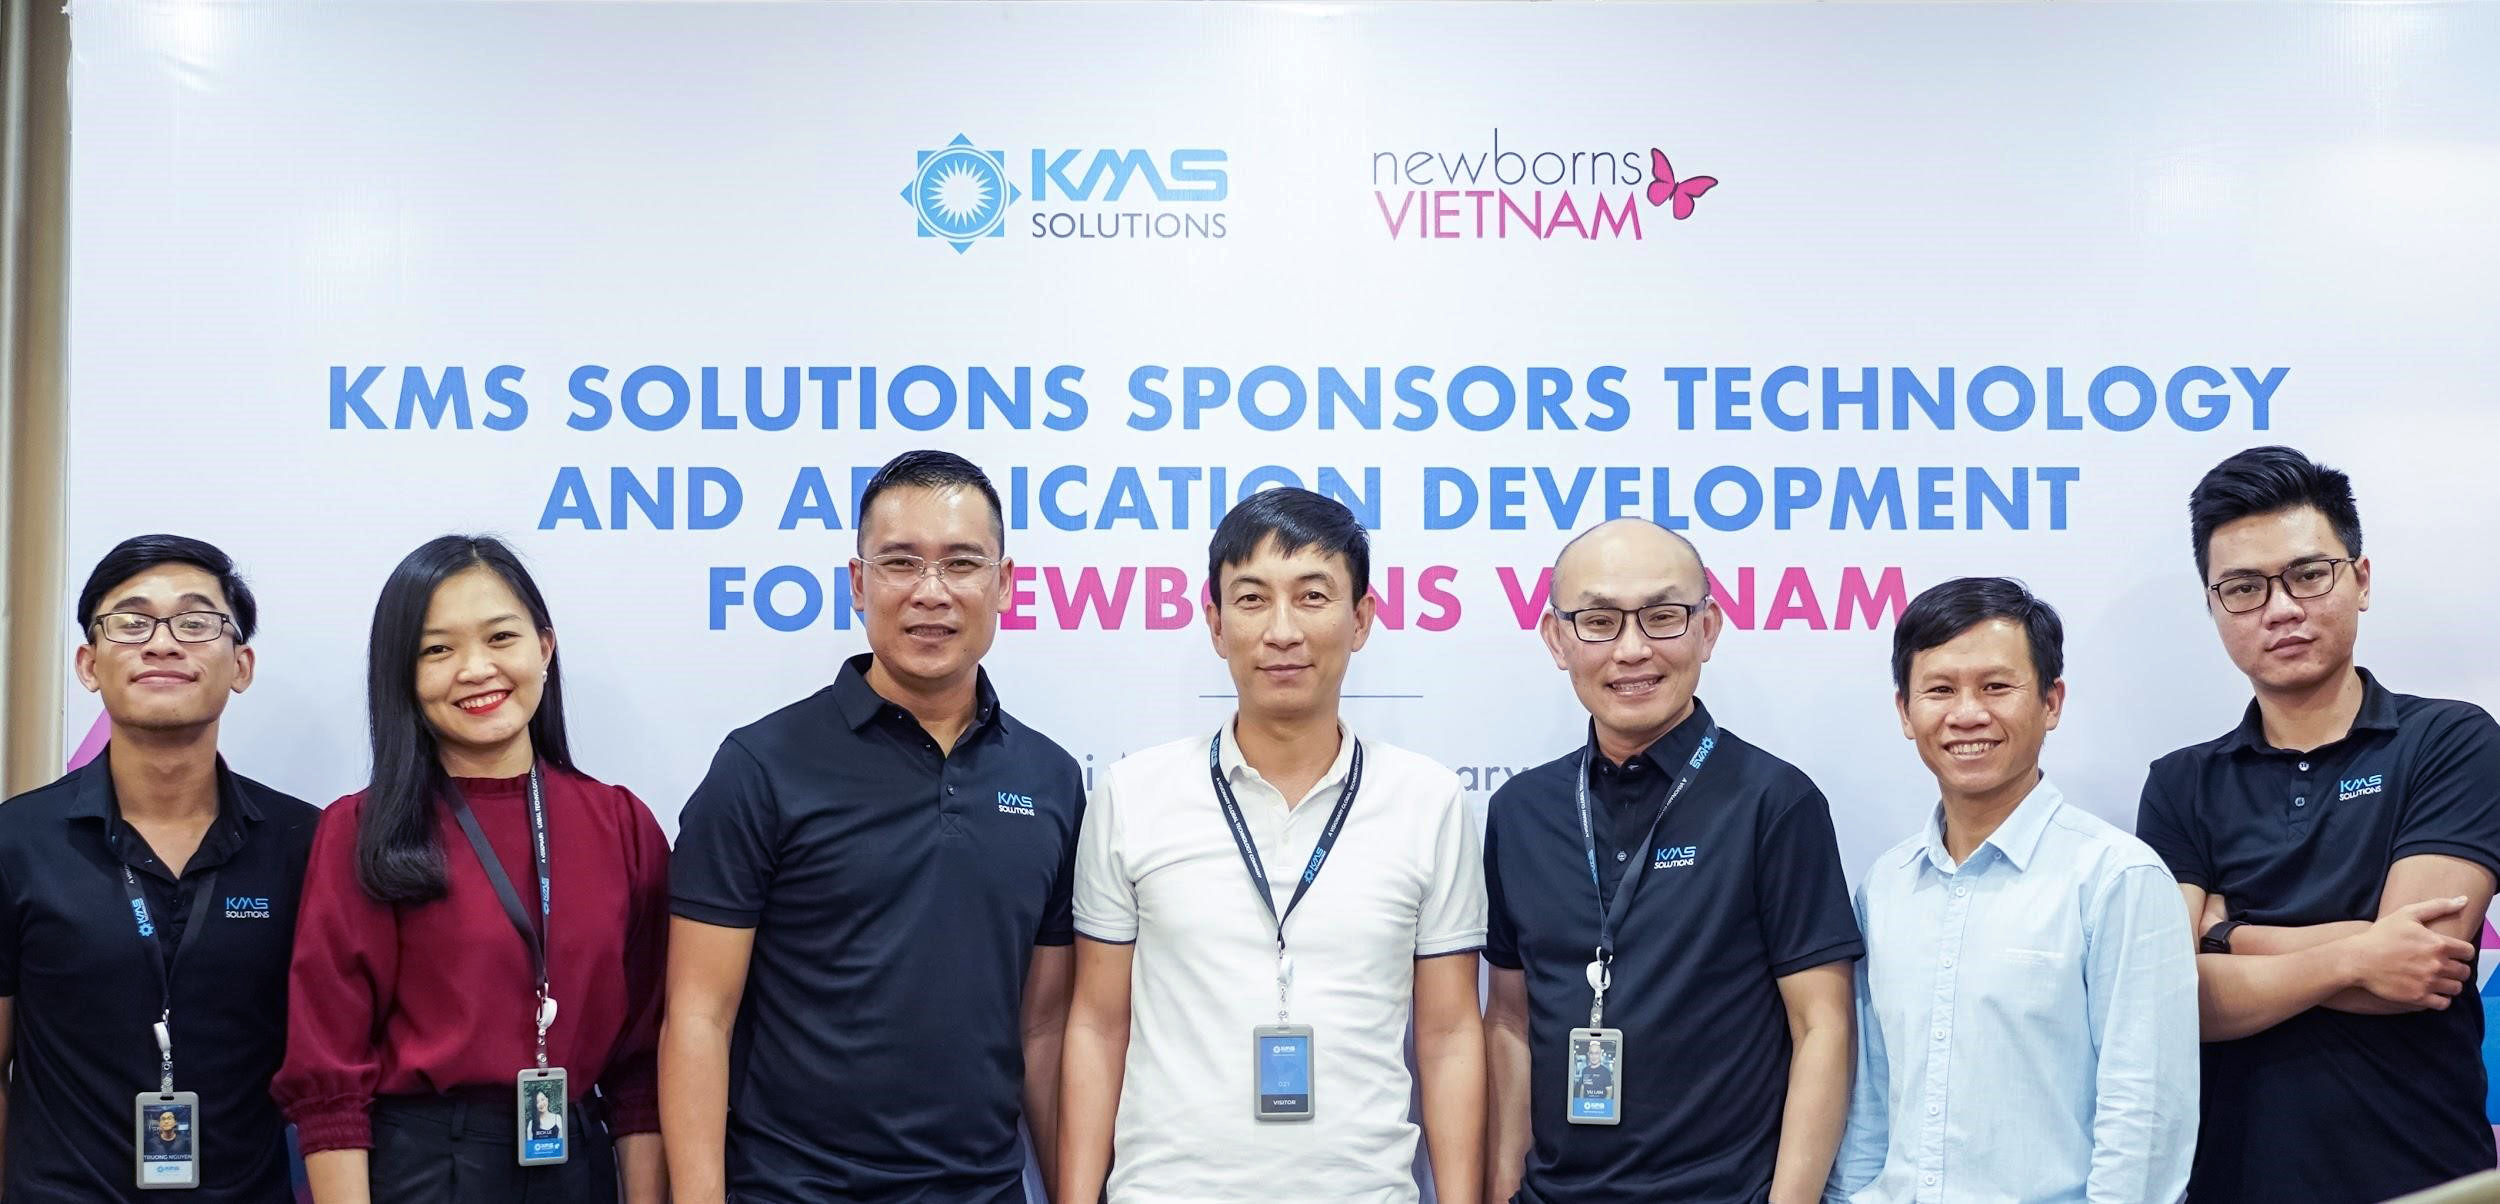 The KMS team stands in front of a banner reading "KMS Solutions sponsors technology and application development for newborns Vietnam."